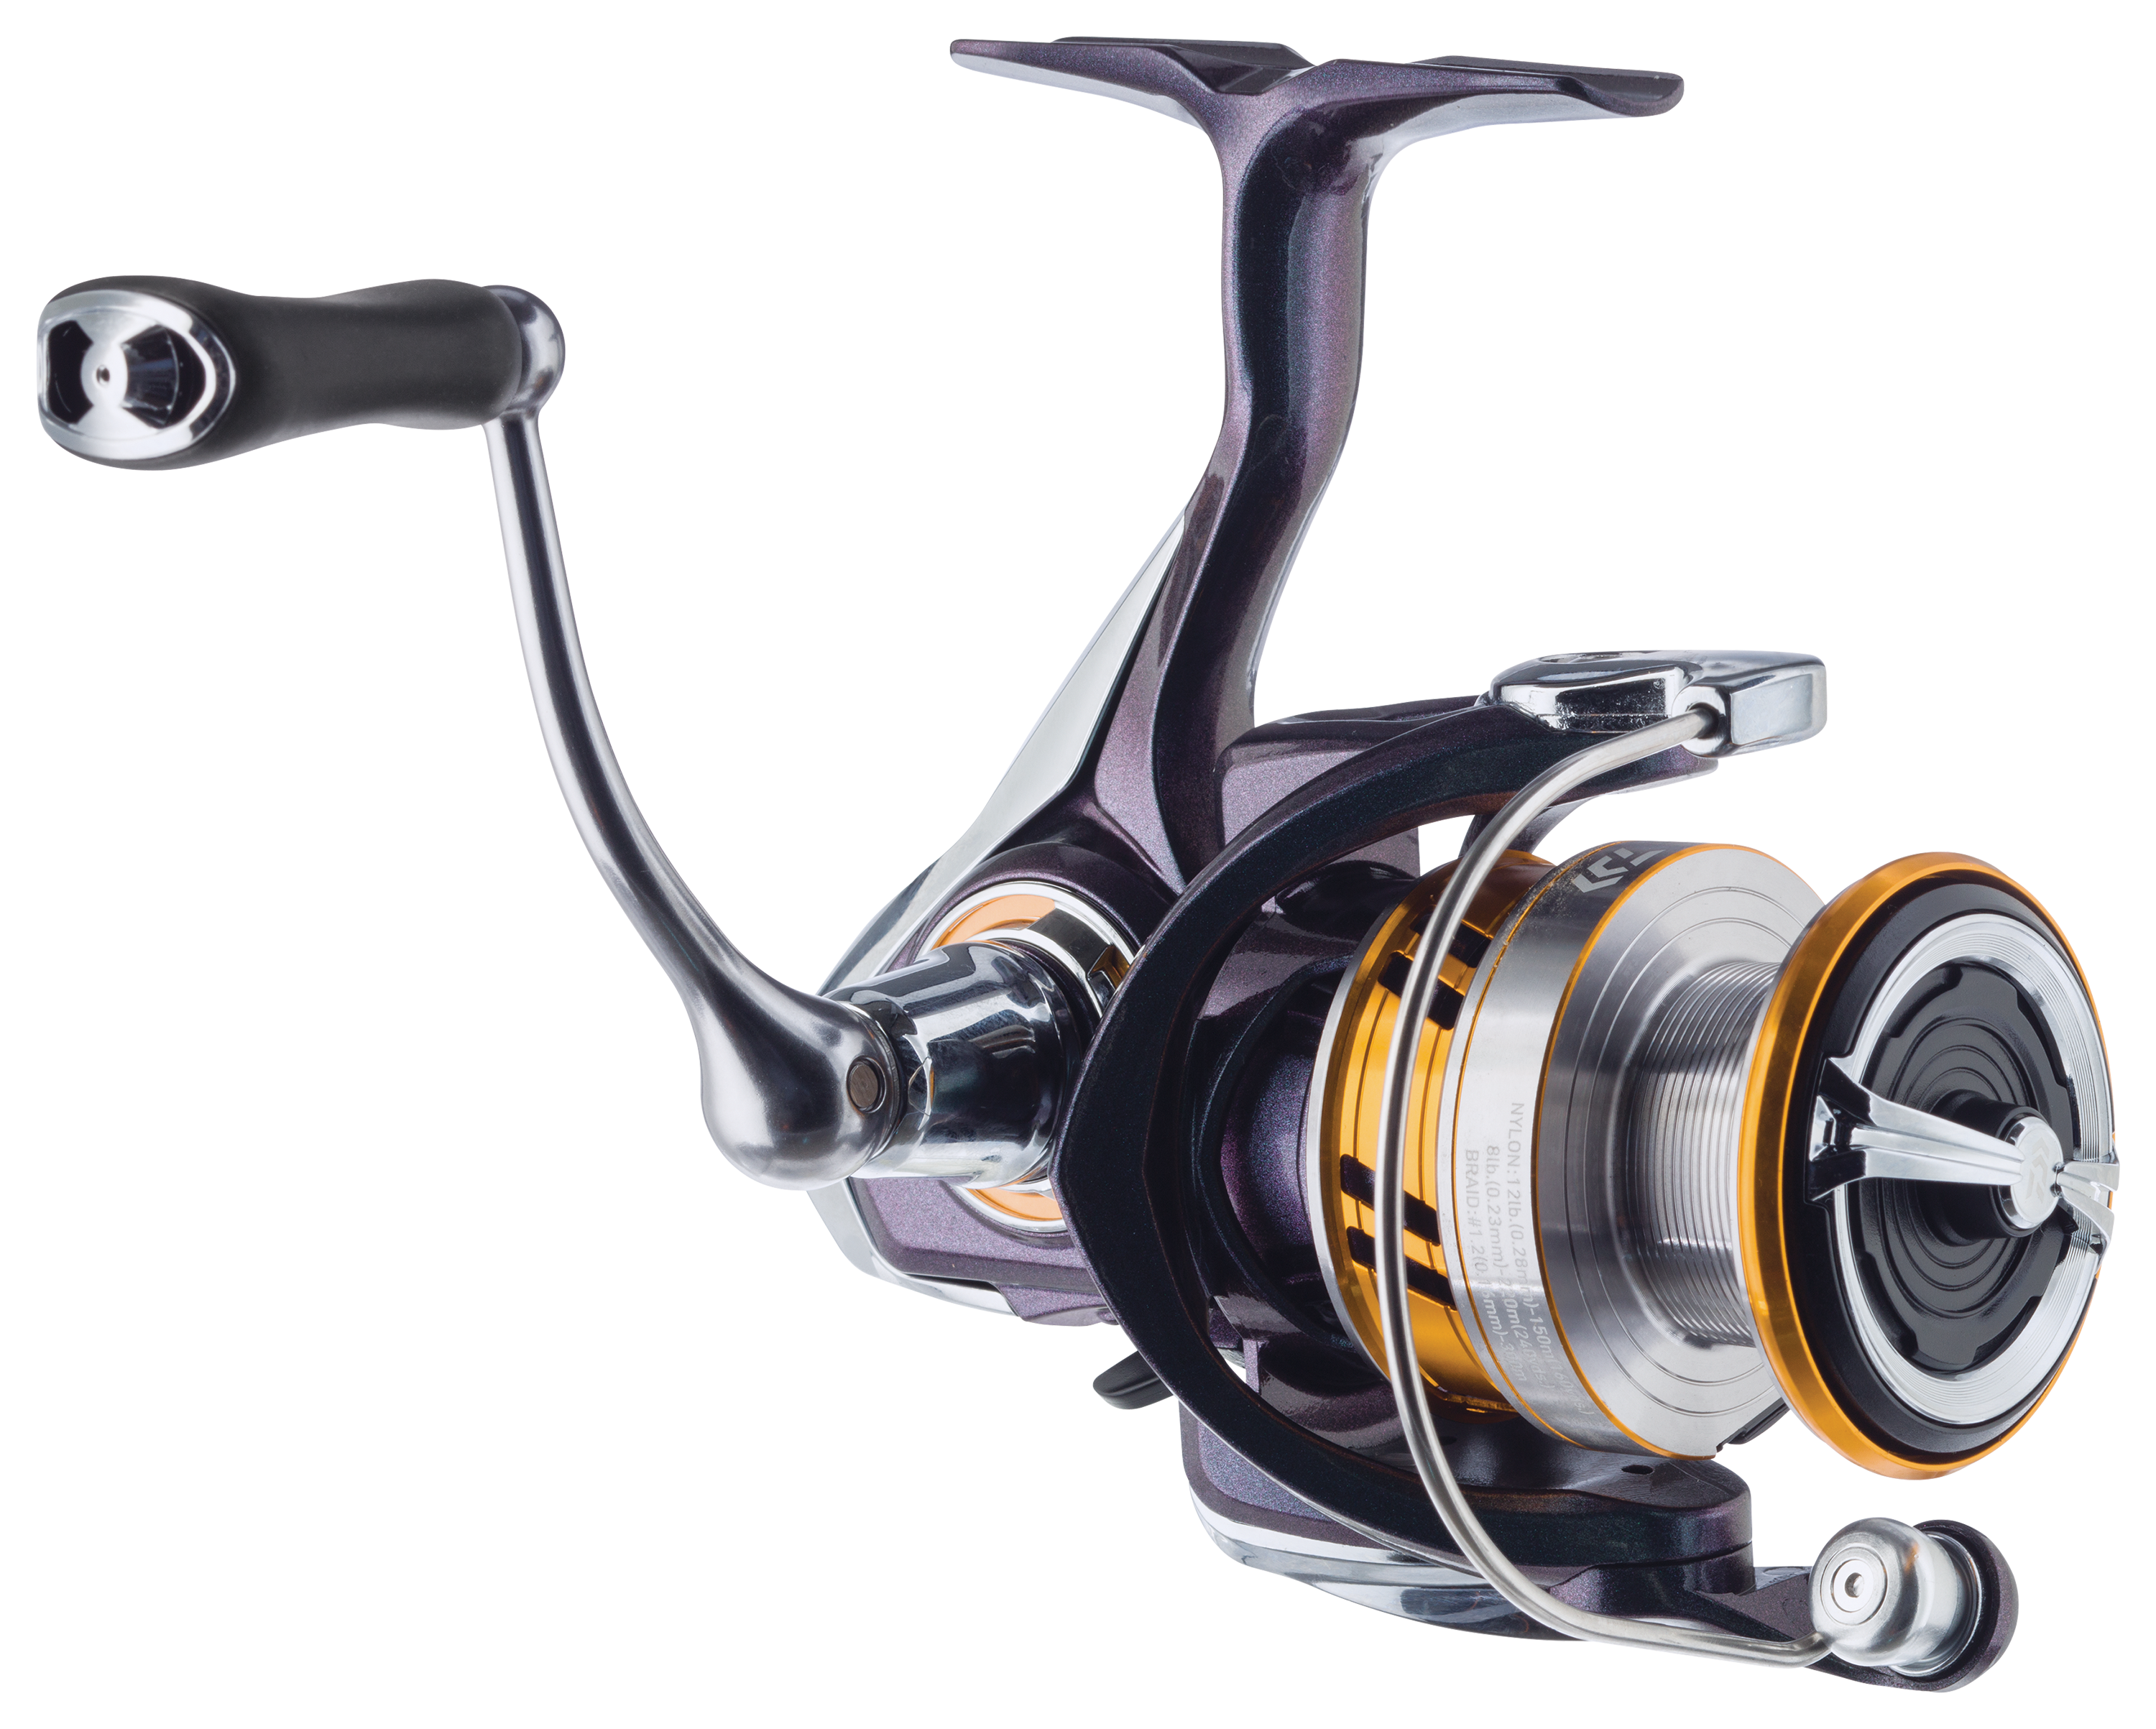 DAIWA REGAL LT 1000S 2000S 2500S 3000D-CXH Saltwater Spinning Fishing Reel  LC-ABS ATD Shallow Deep Reel Sea Reel Fishing Tackle